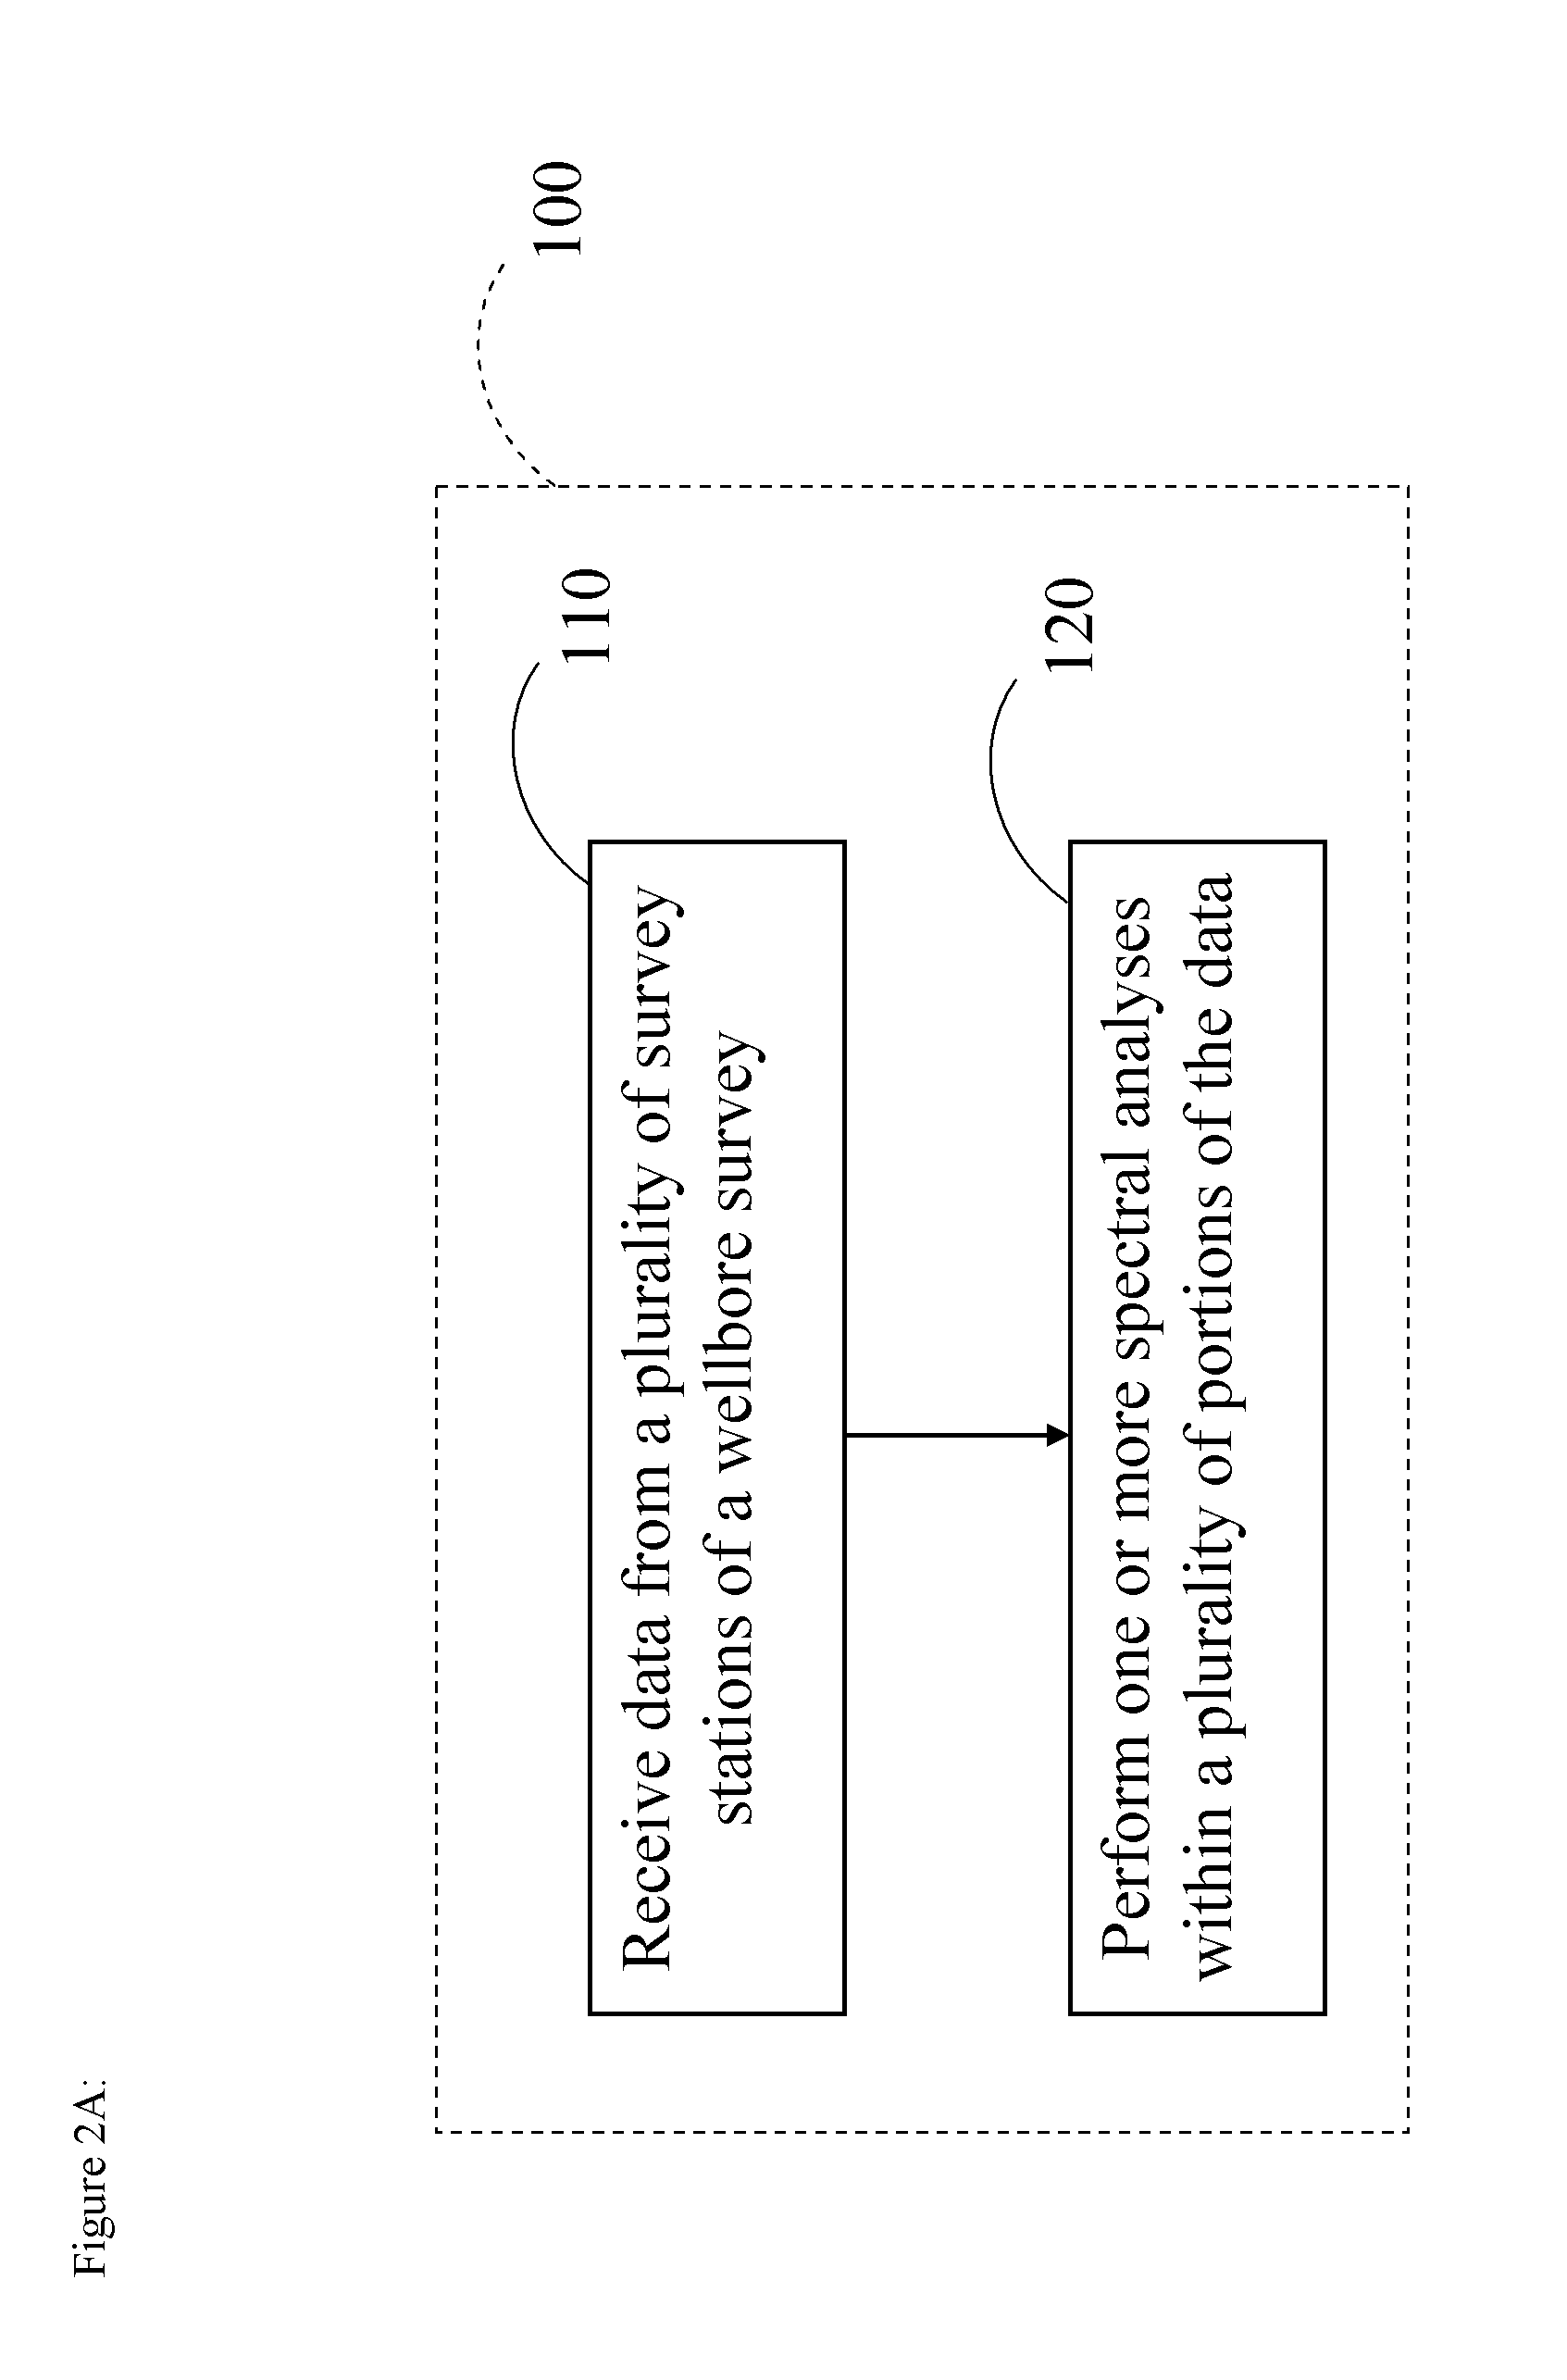 System and method for analyzing wellbore survey data to determine tortuosity of the wellbore using displacements of the wellbore path from reference lines